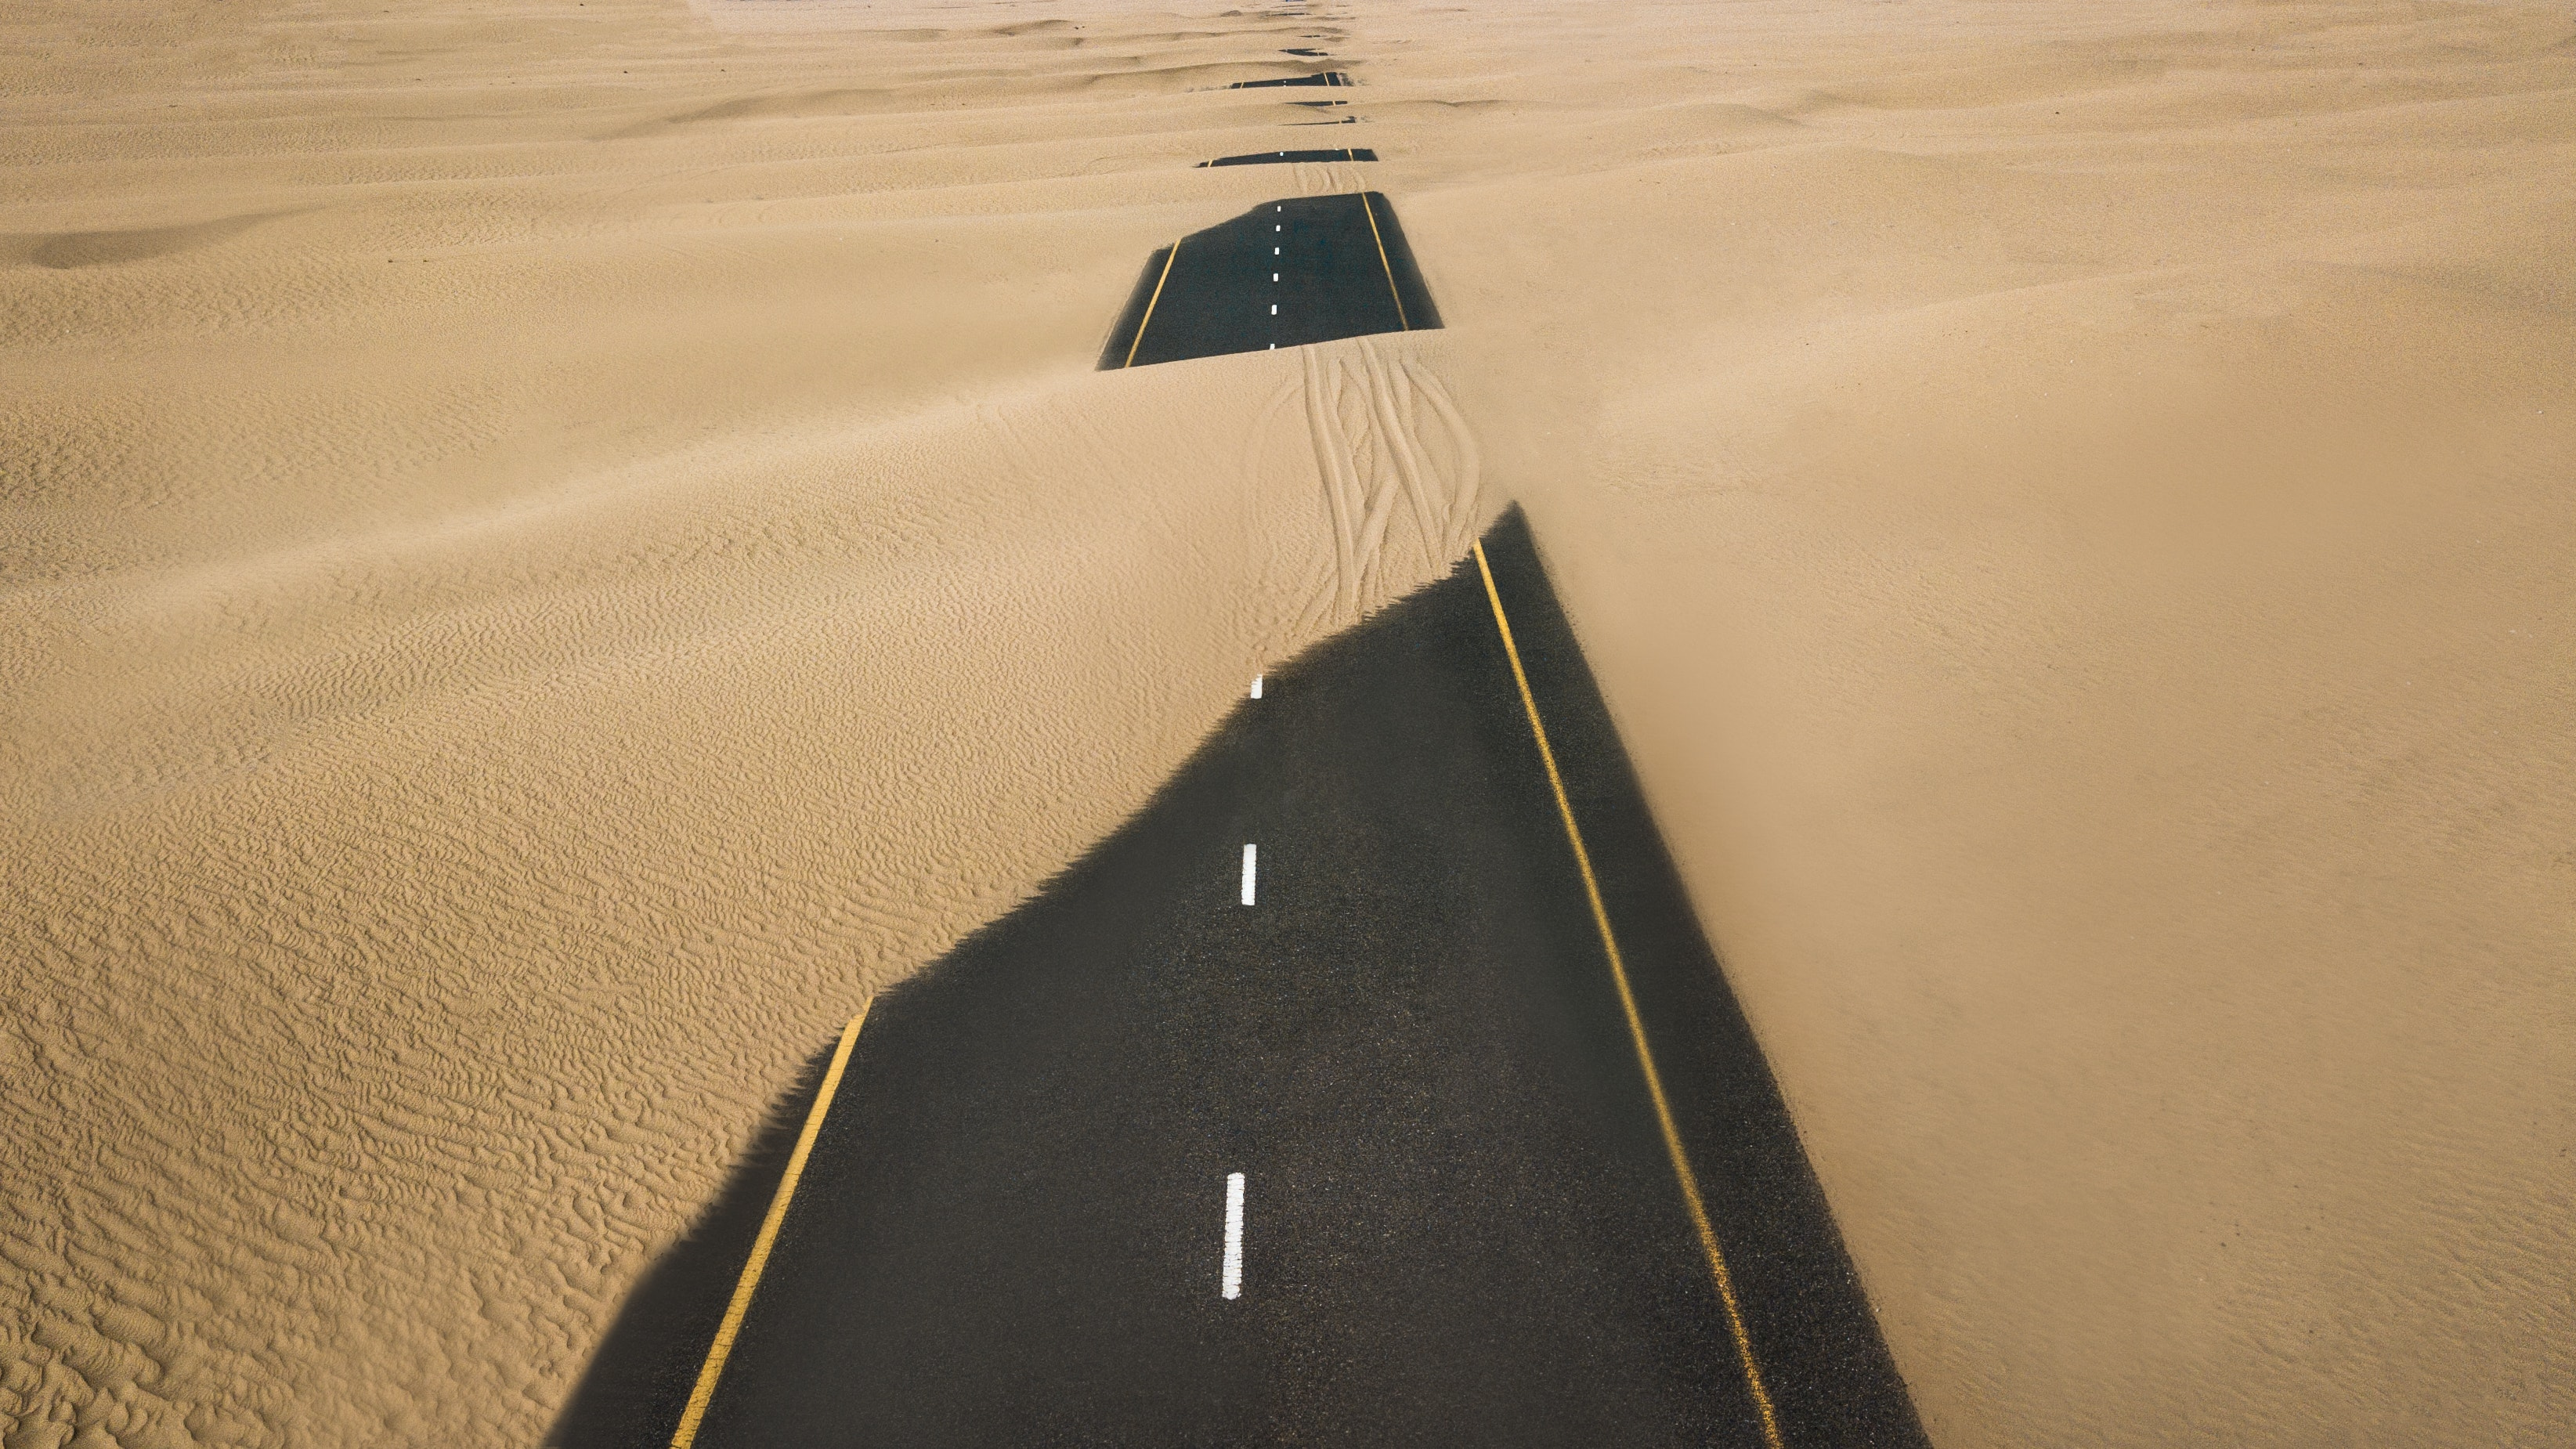 Road Covered in Sand Dunes by Antas Singh